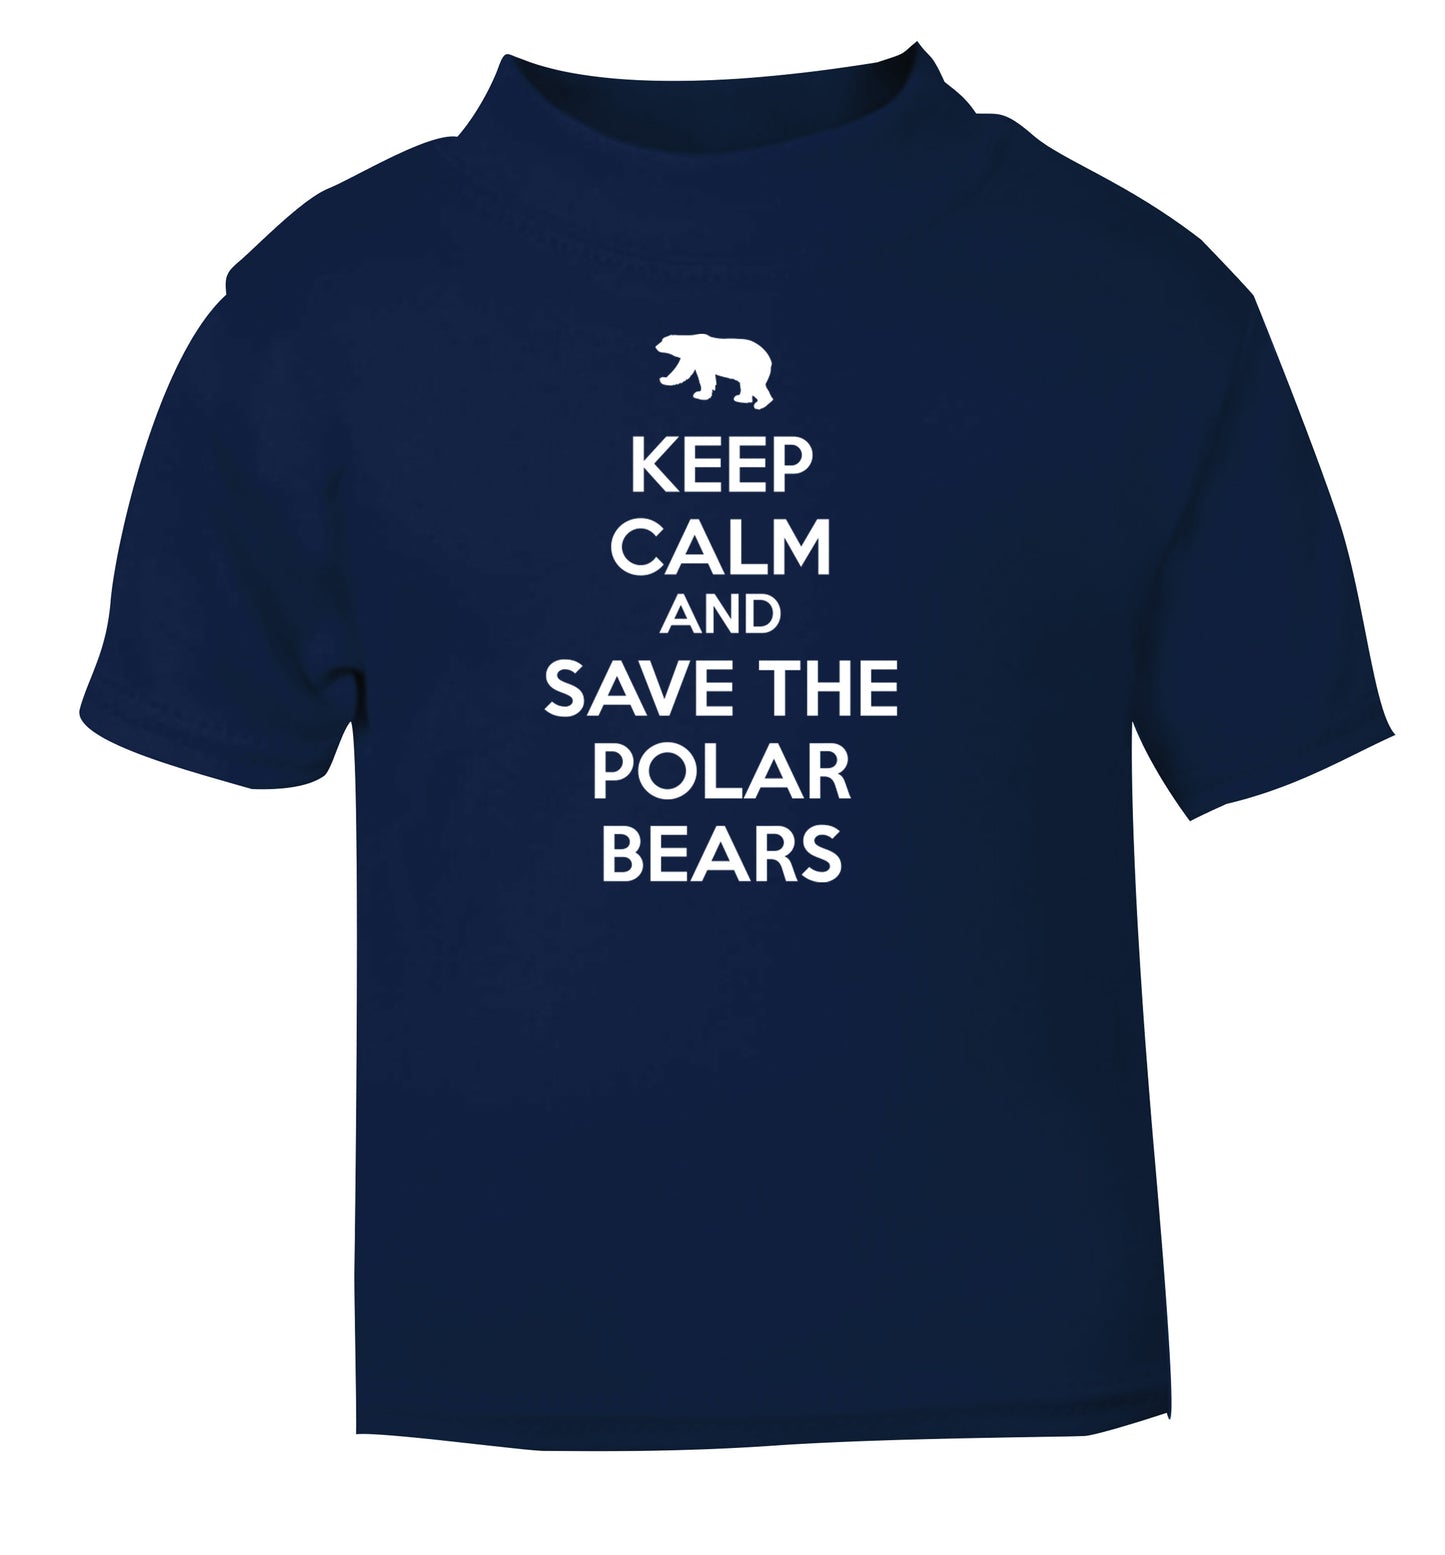 Keep calm and save the polar bears navy Baby Toddler Tshirt 2 Years